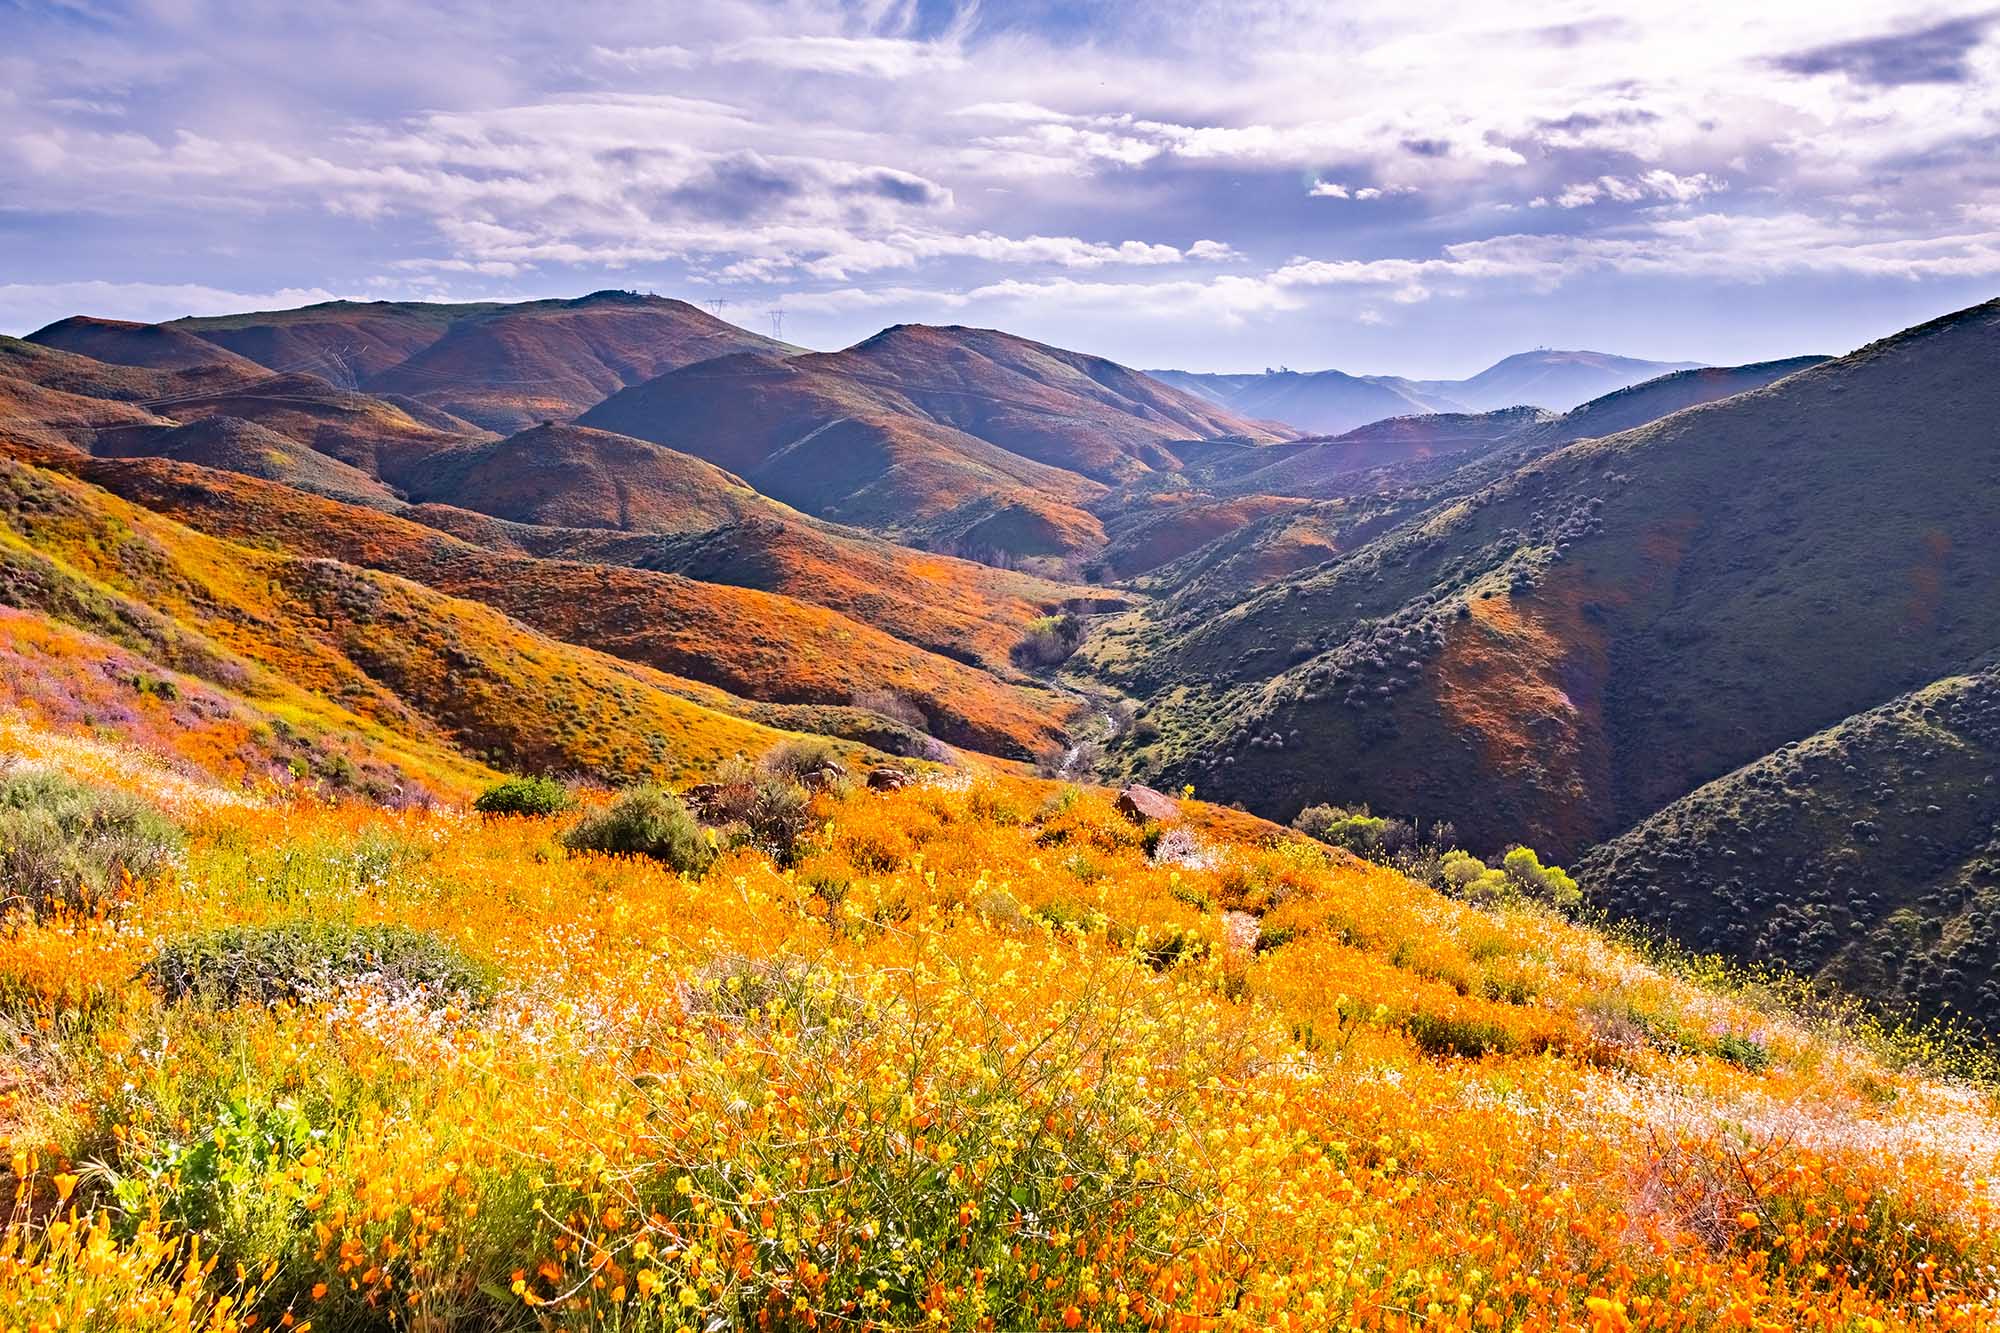 what is a superbloom? Picture of a california superbloom of wildflowers.